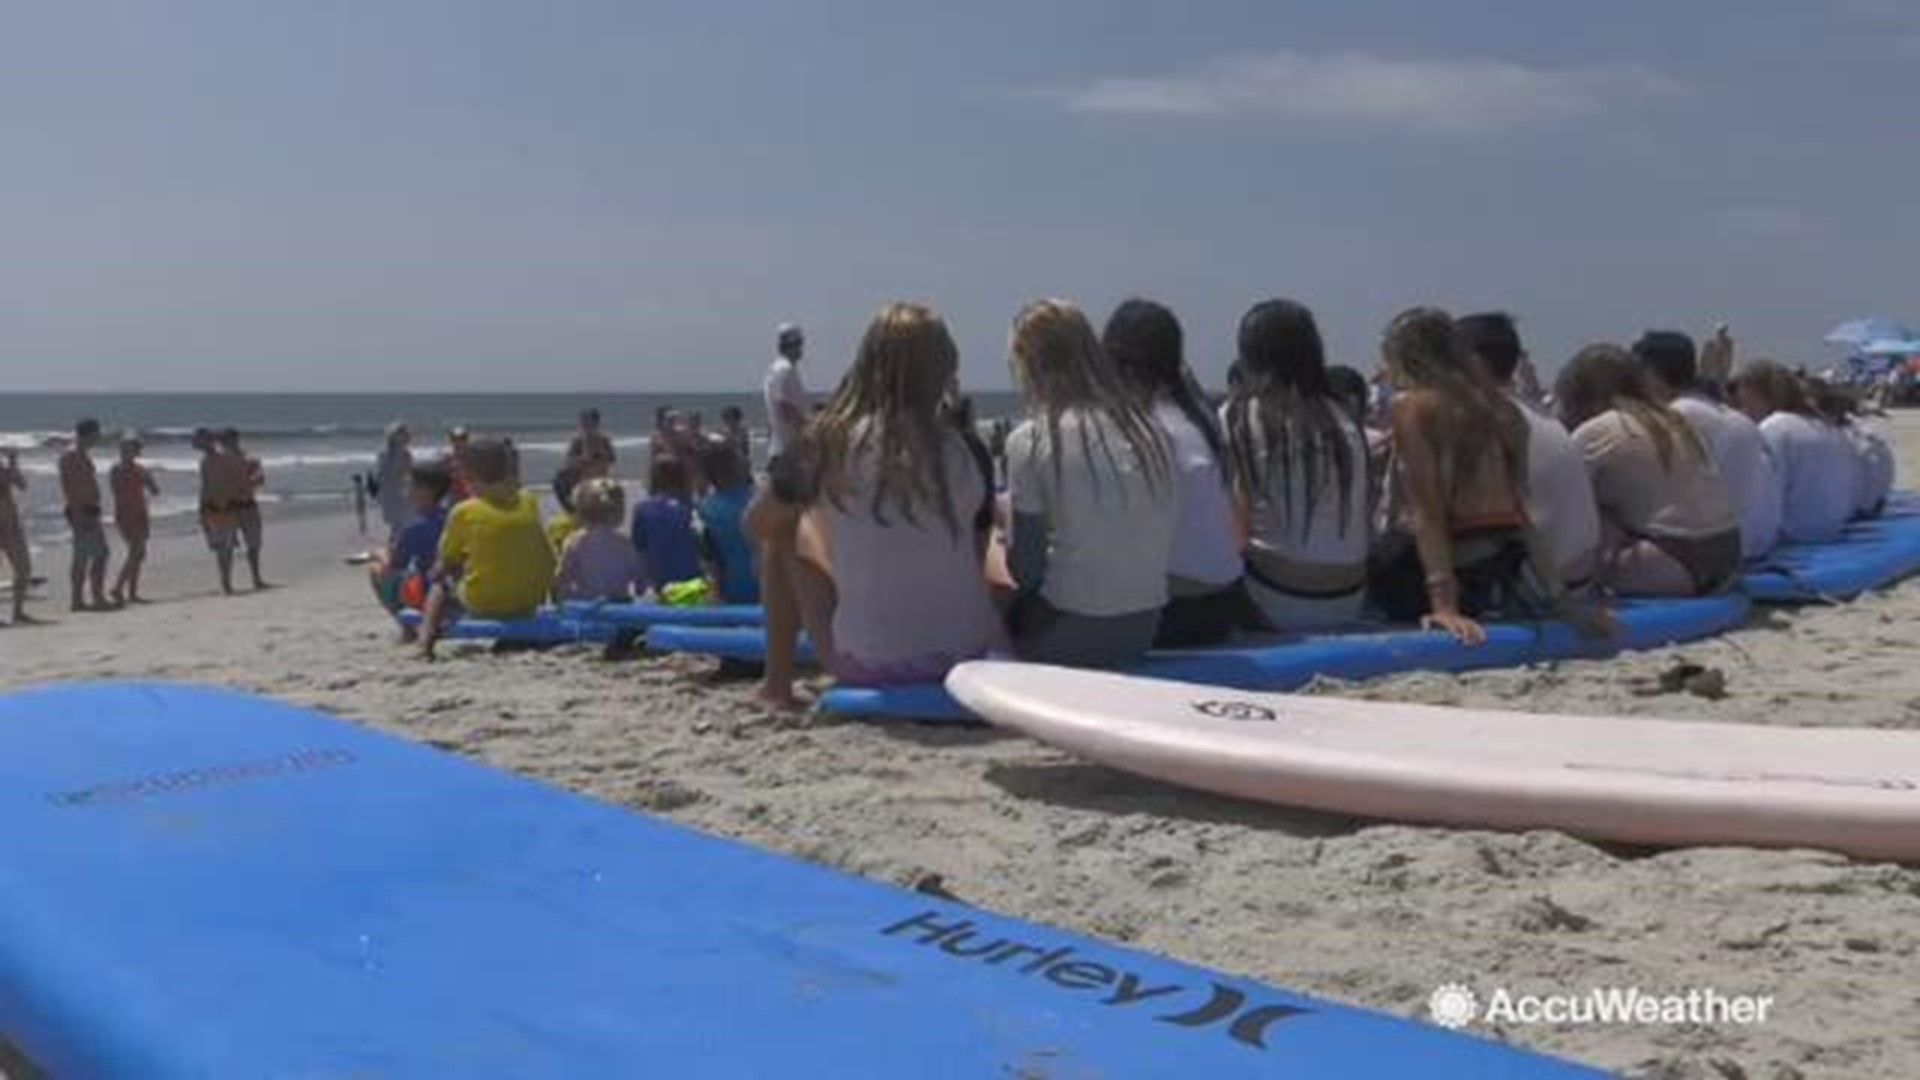 AccuWeather reporter Kena Vernon was in Long Beach, New York where the Surf for All organization held surfing lessons for kids with disabilities.